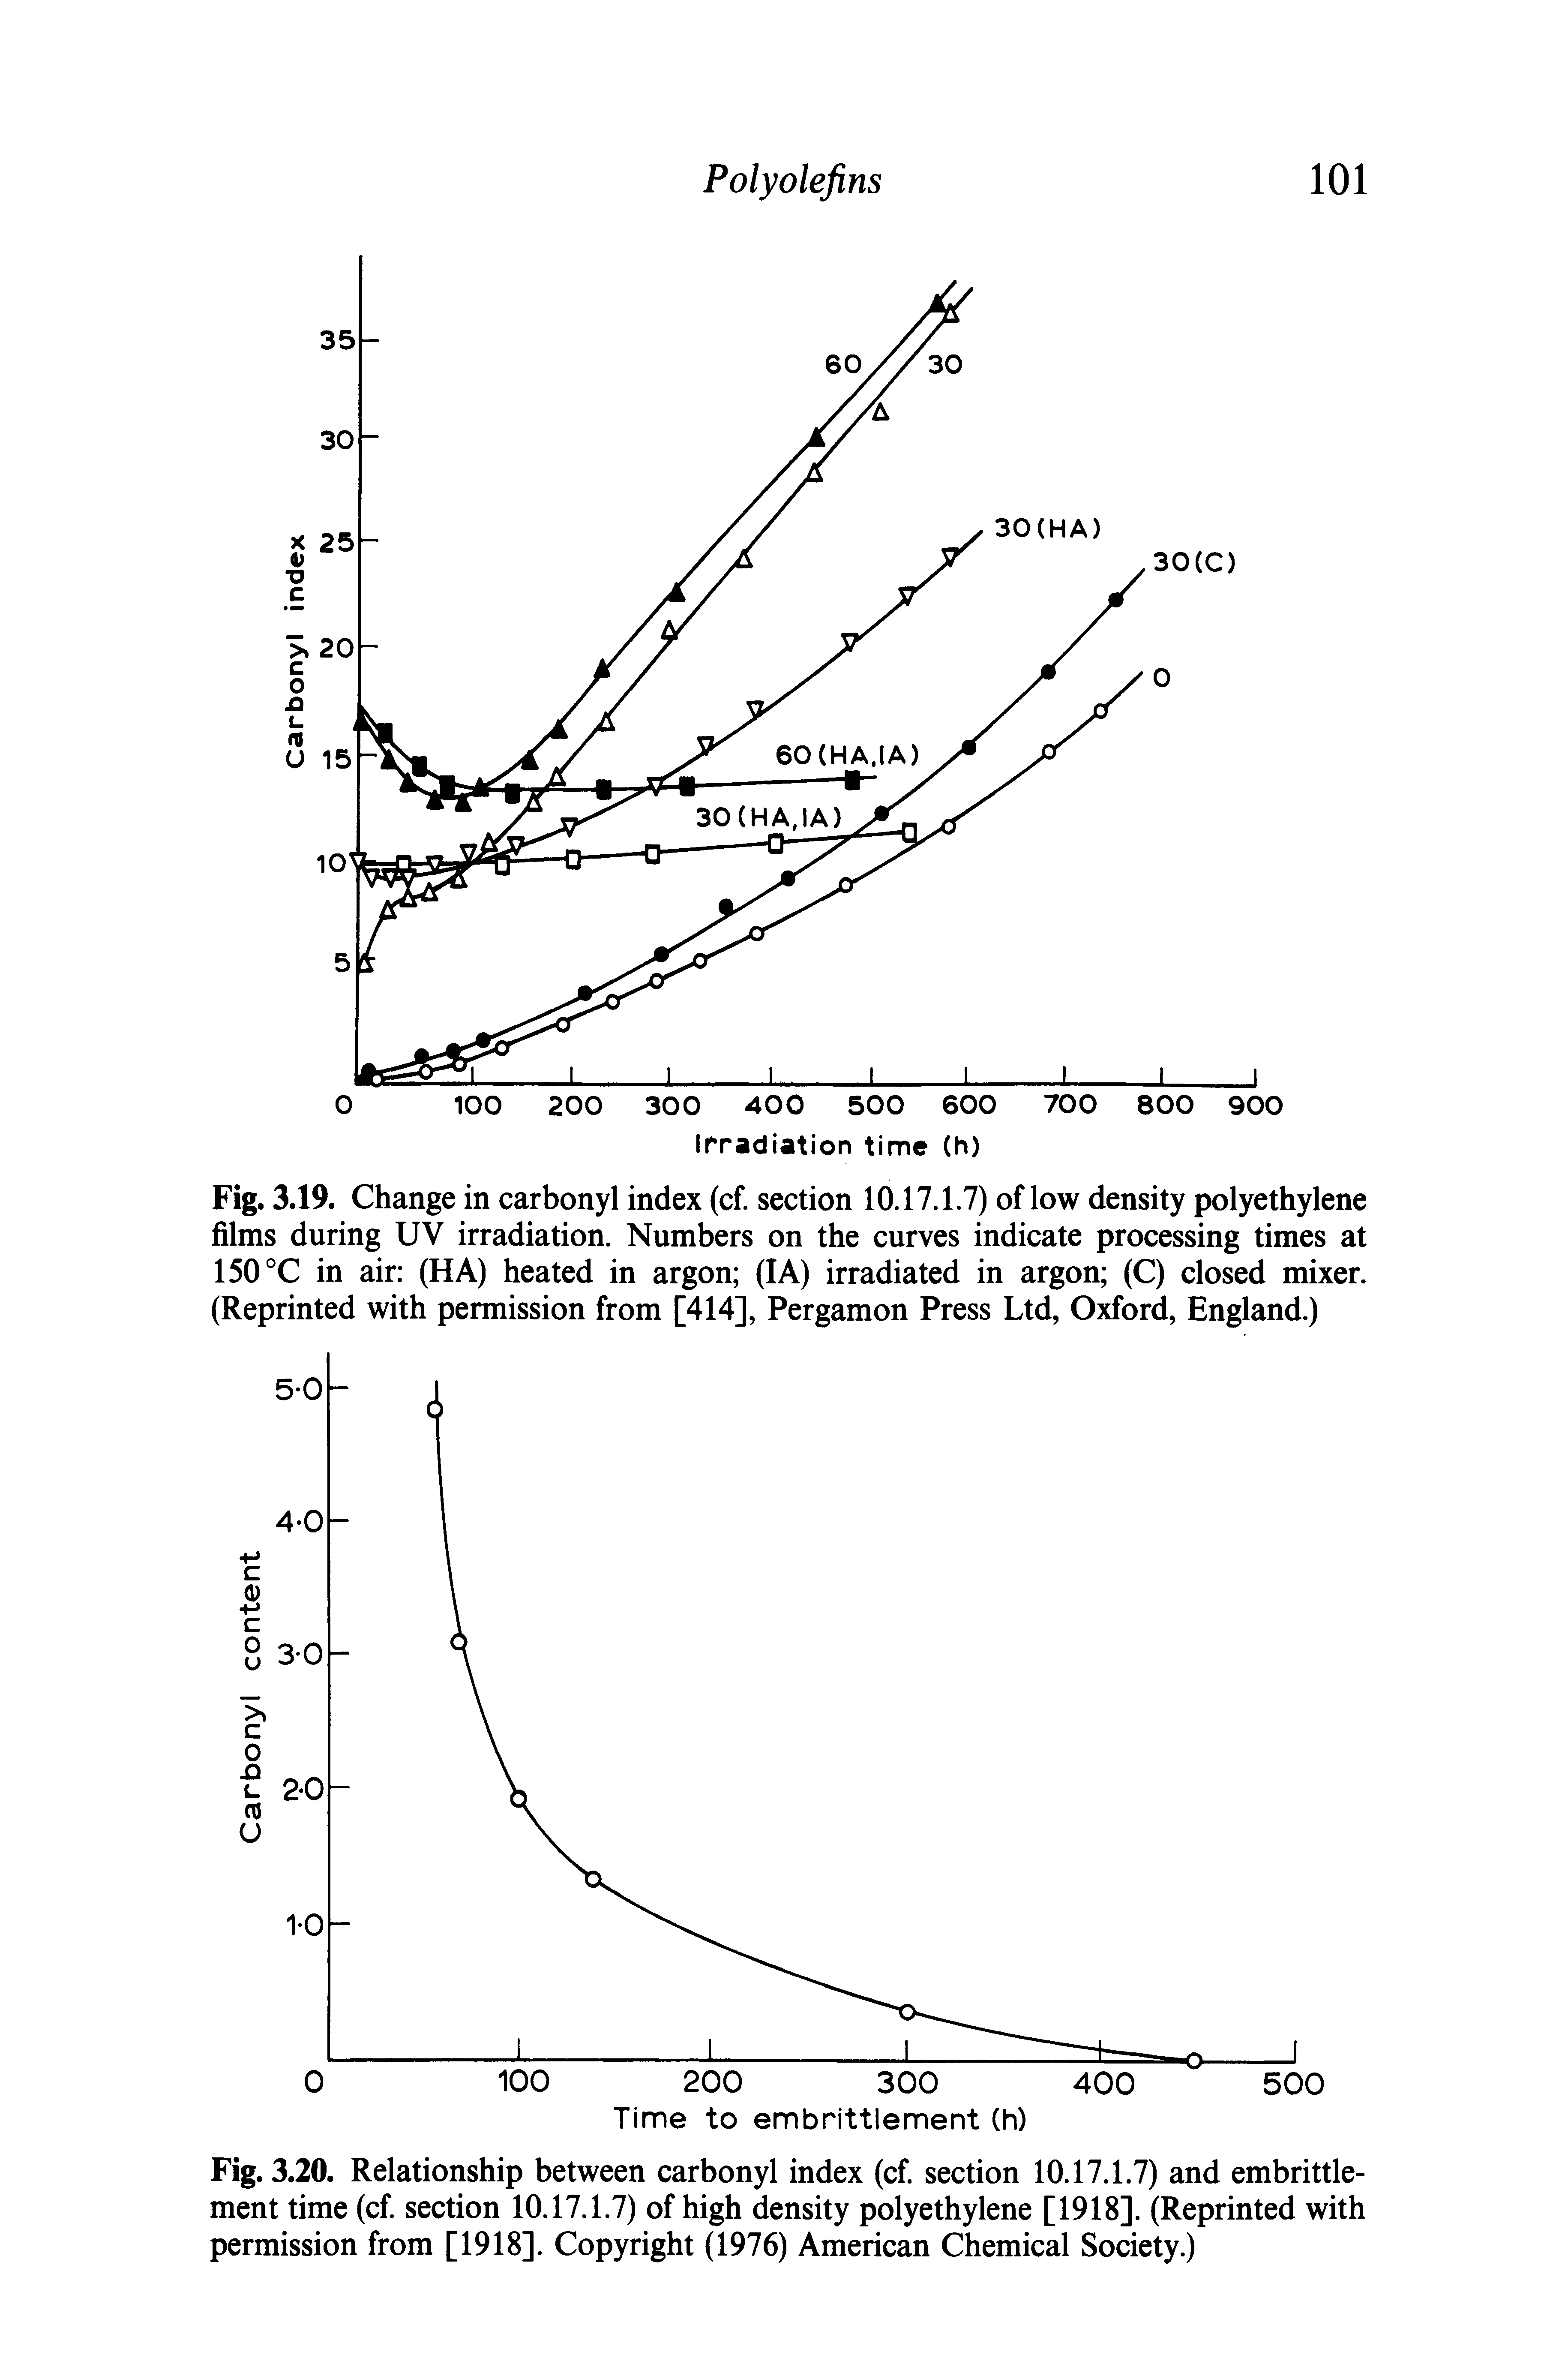 Fig. 3.19. Change in carbonyl index (cf. section 10.17.1.7) of low density polyethylene films during UV irradiation. Numbers on the curves indicate processing times at 150 °C in air (HA) heated in argon (IA) irradiated in argon (C) closed mixer. (Reprinted with permission from [414], Pergamon Press Ltd, Oxford, England.)...